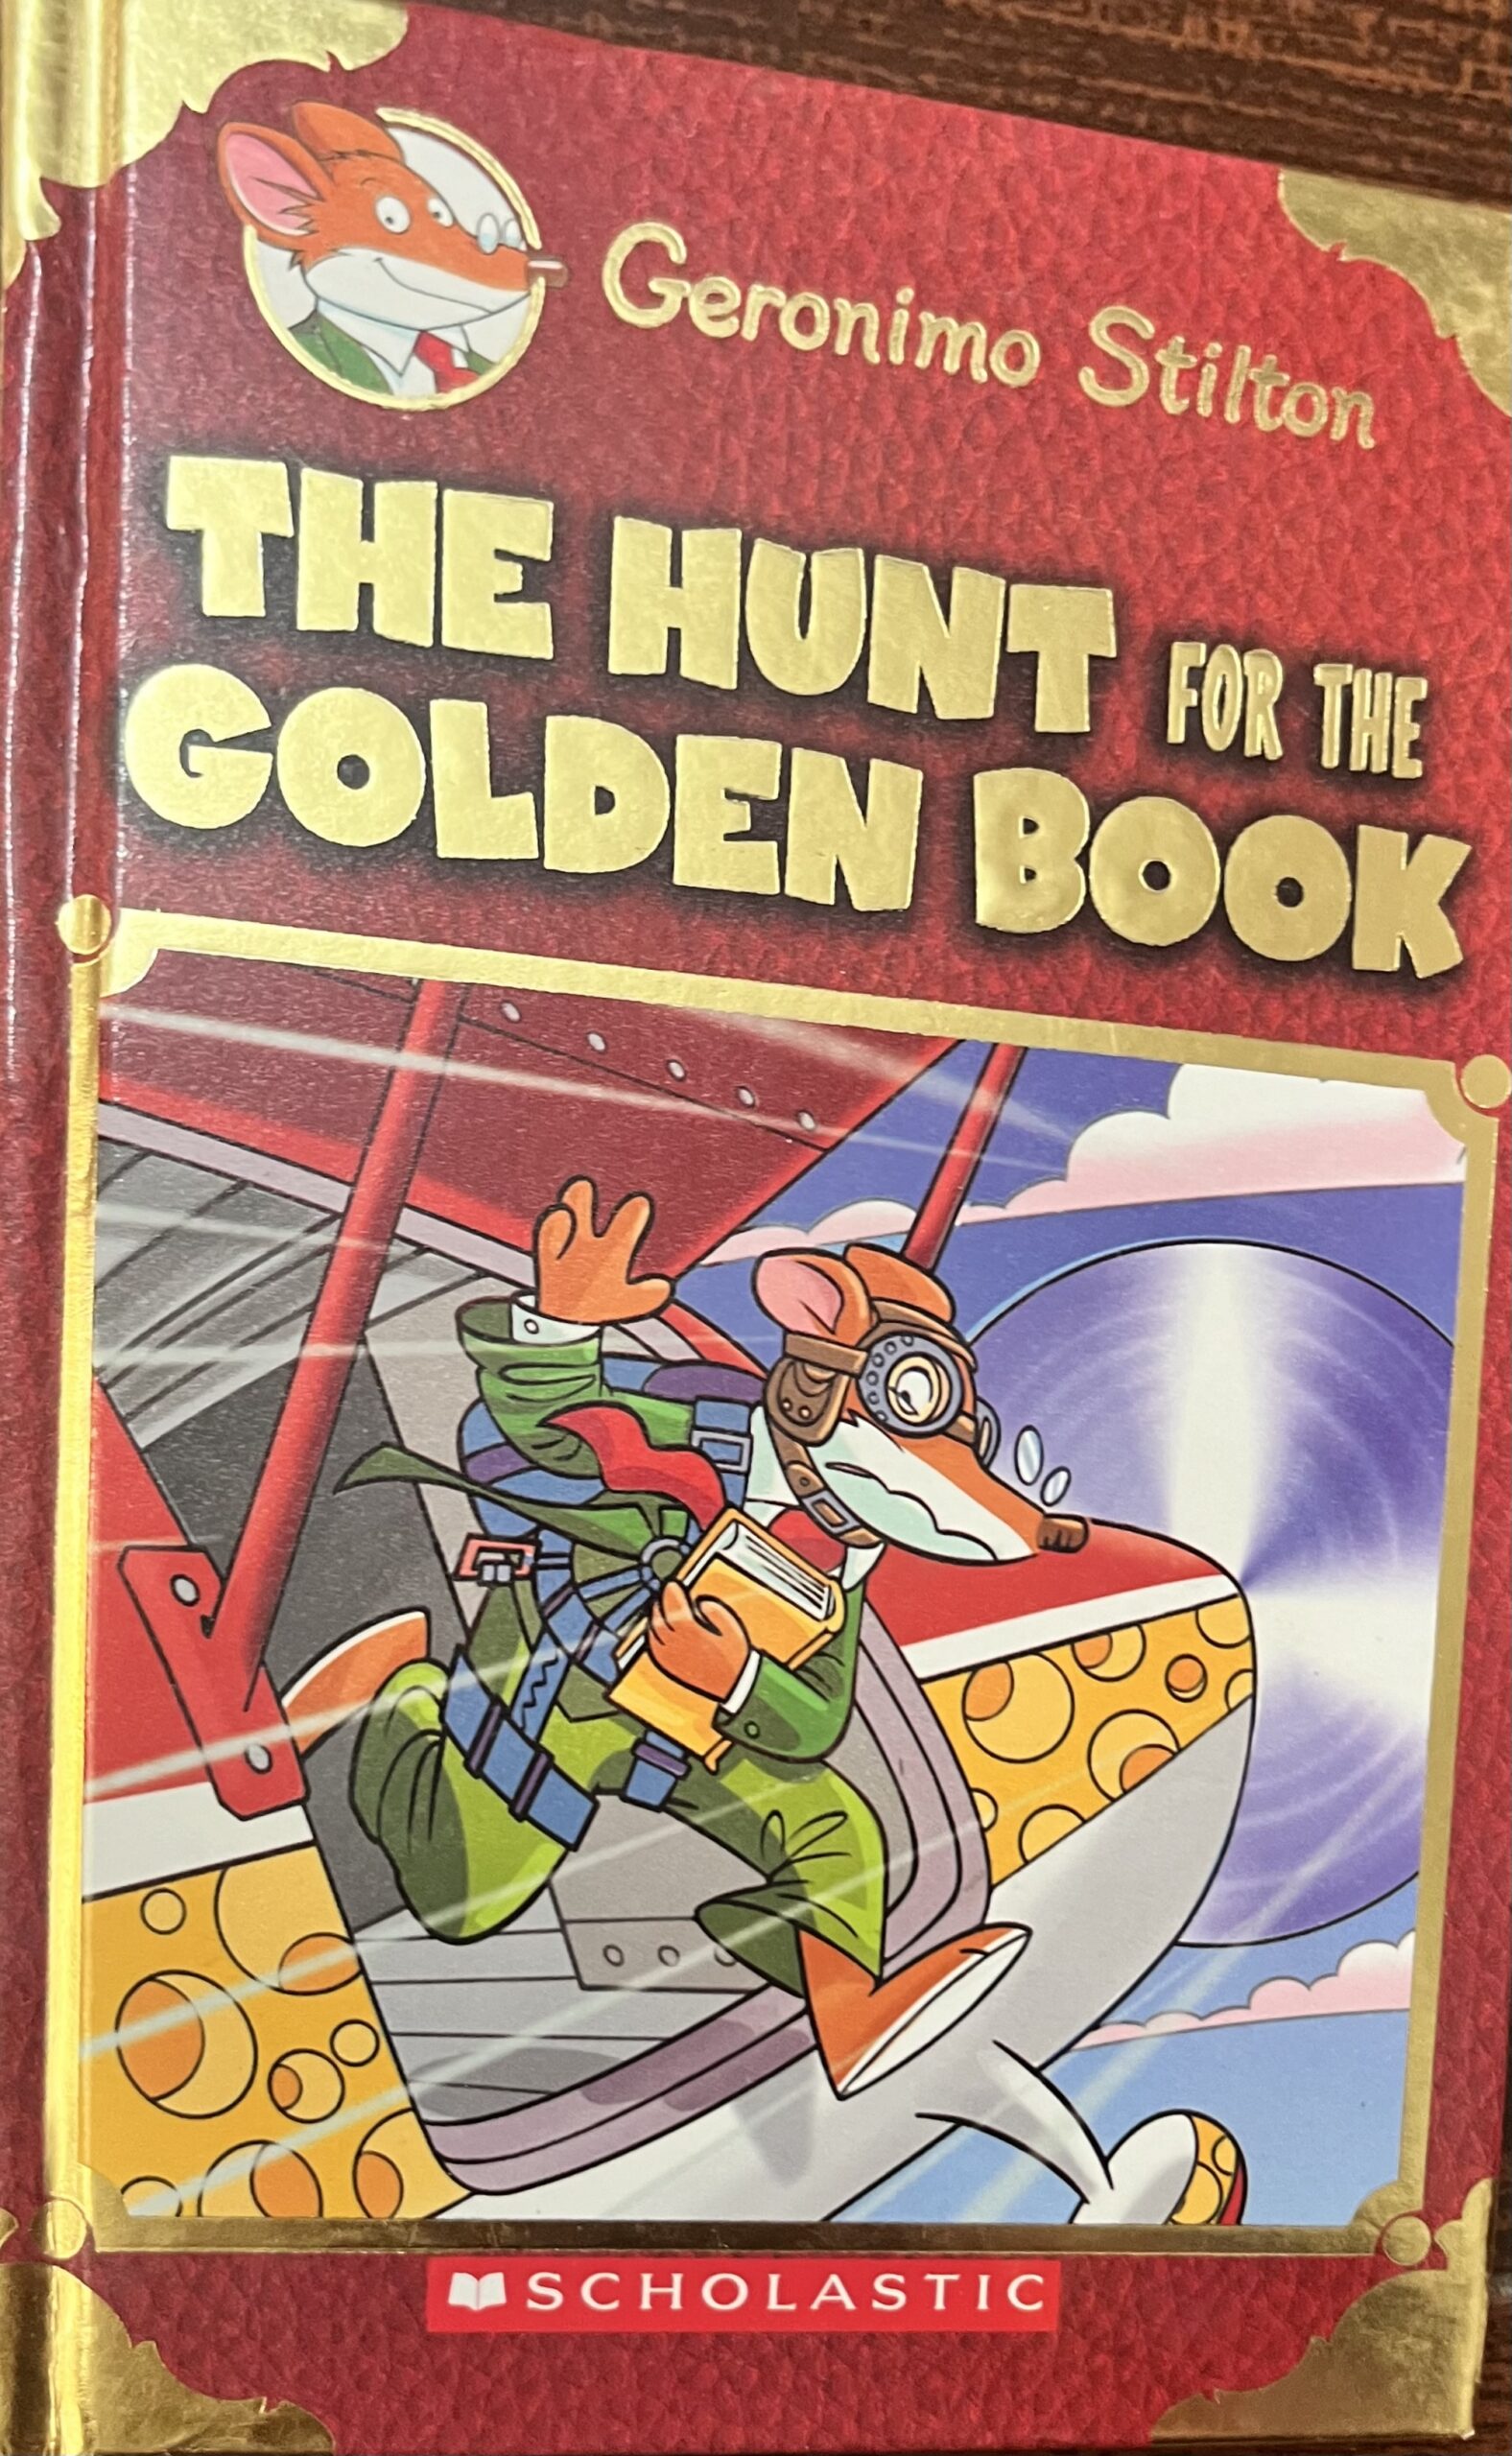 The Hunt for the Golden book